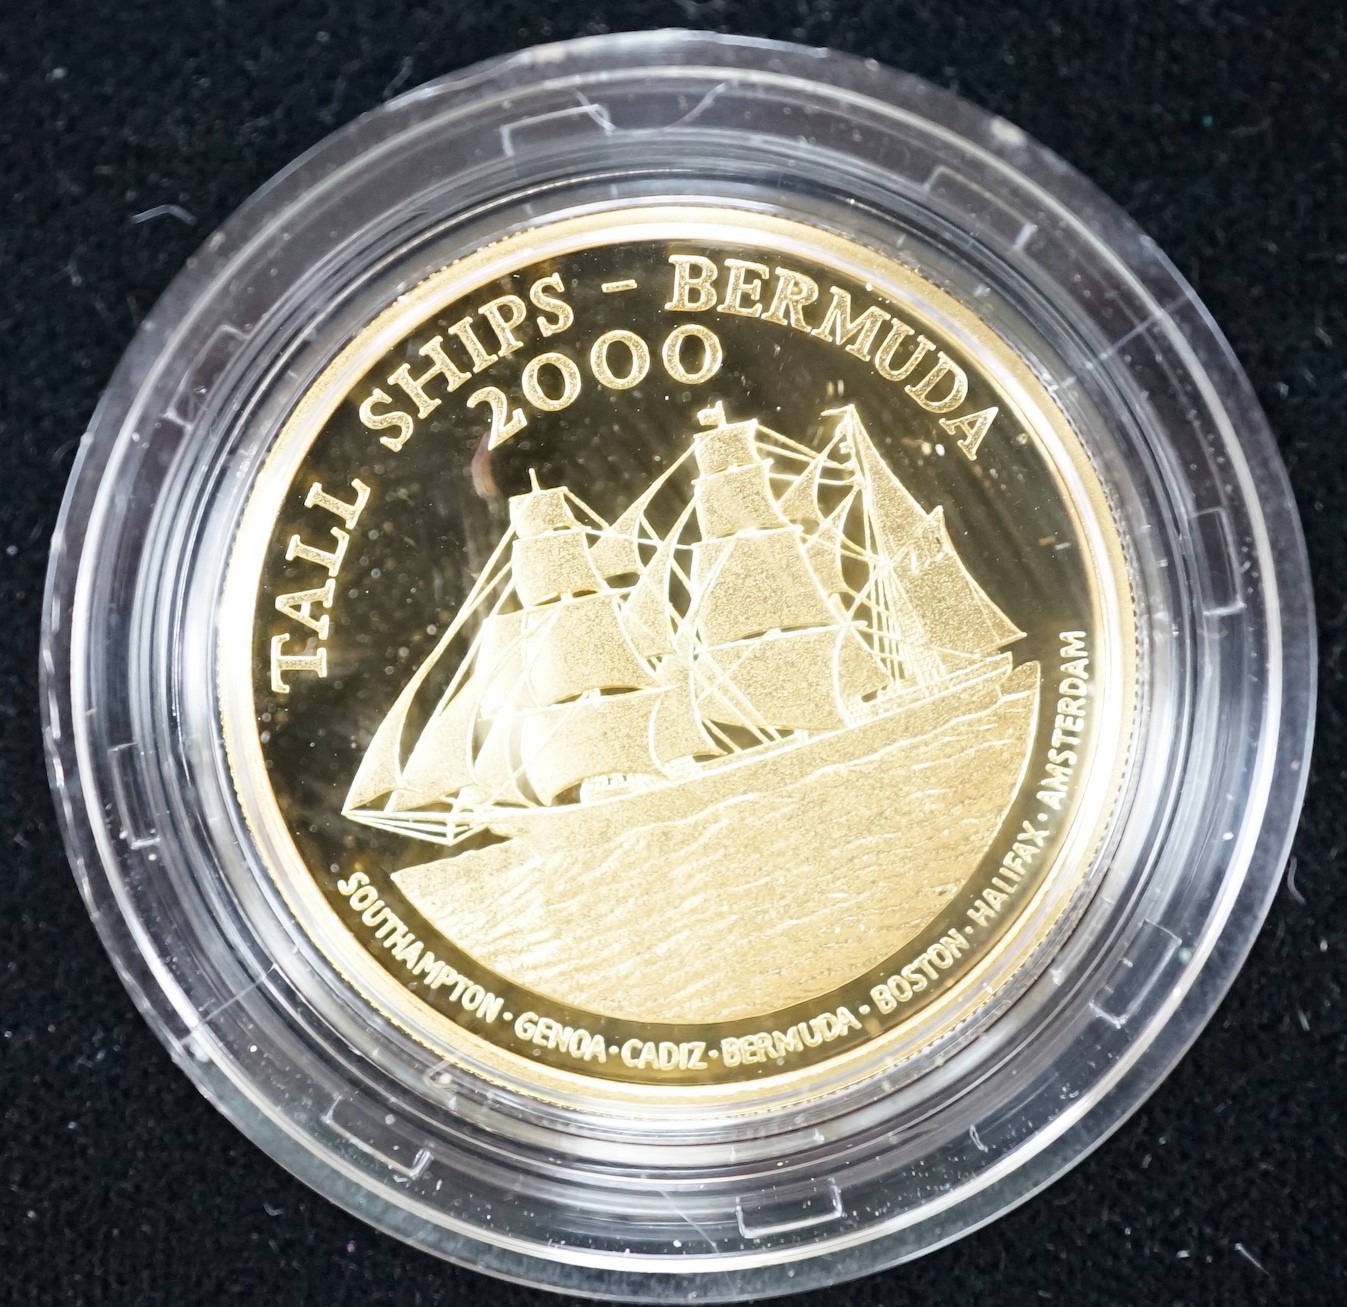 A cased Tall Ships Bermuda 2000 Race of the Century Commemorative gold proof $15 coin, with certificate, no. 0388.